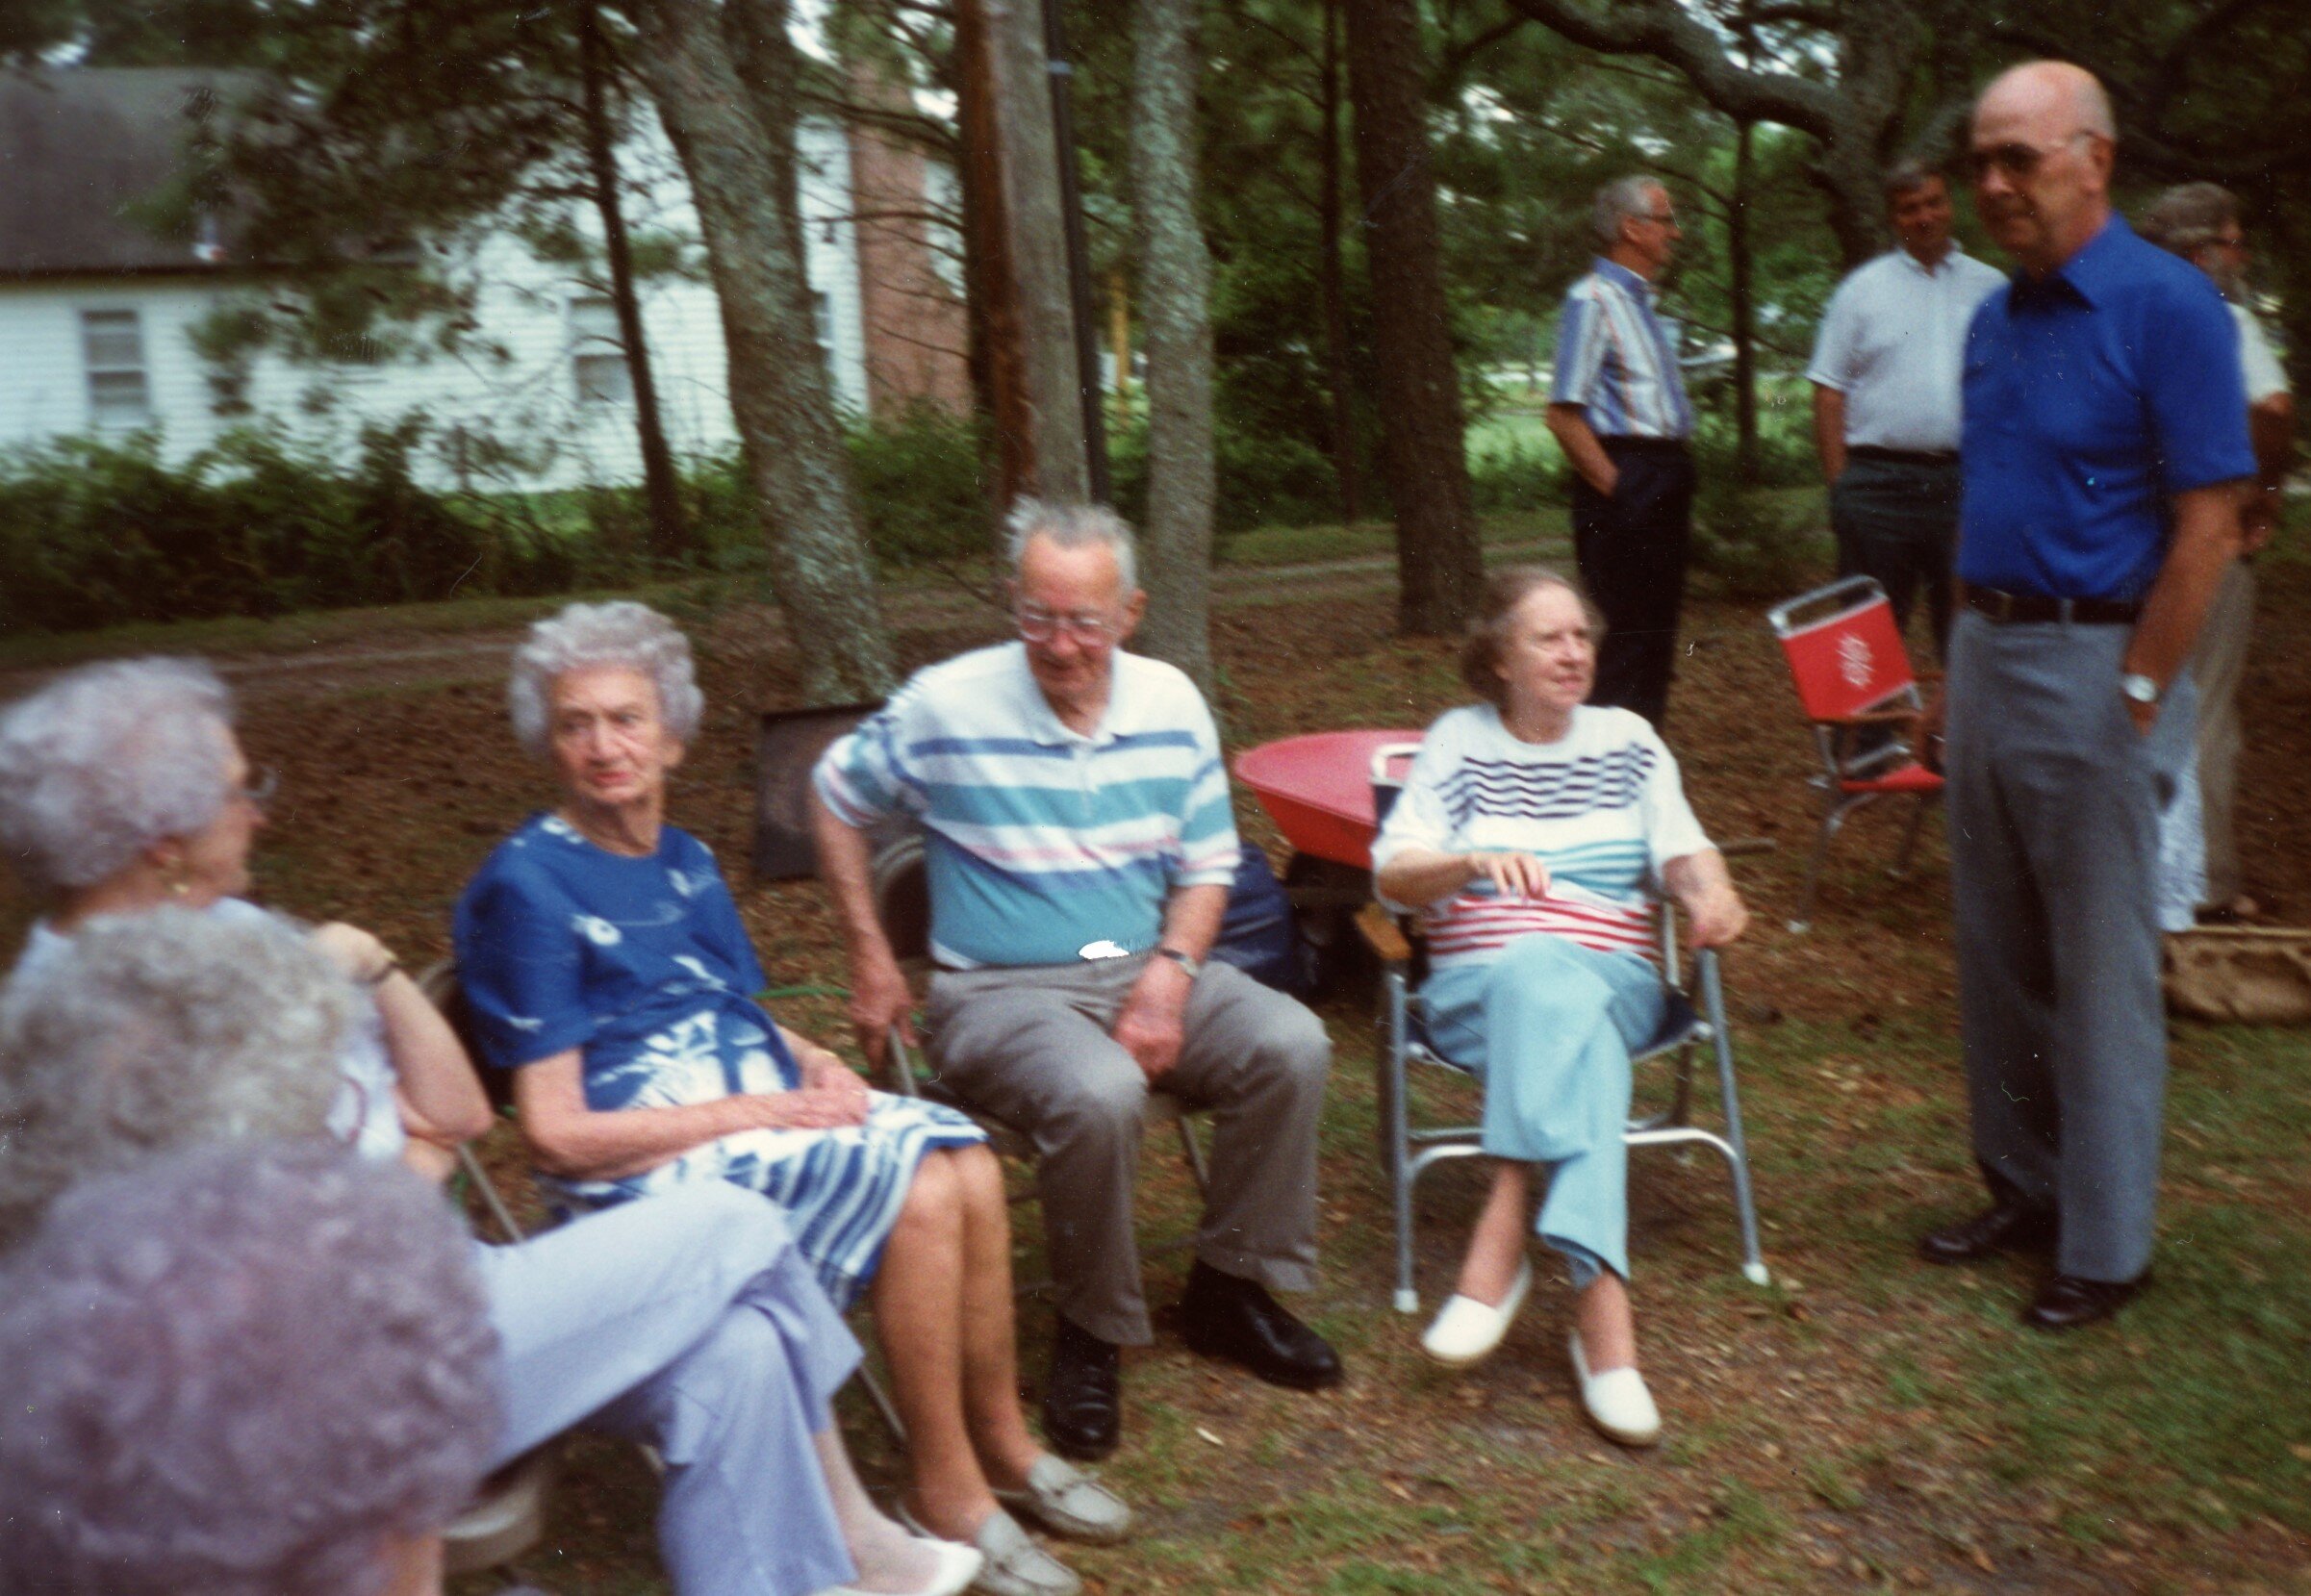  L-R: Annebelle Chadwick (Vance’s second wife–dated in college), Evelyn Chadwick Damren, Vance Chadwick, Florence Pigott (all seated) Craig Lewis standing. In the background are David Chadwick, Paul Damren 